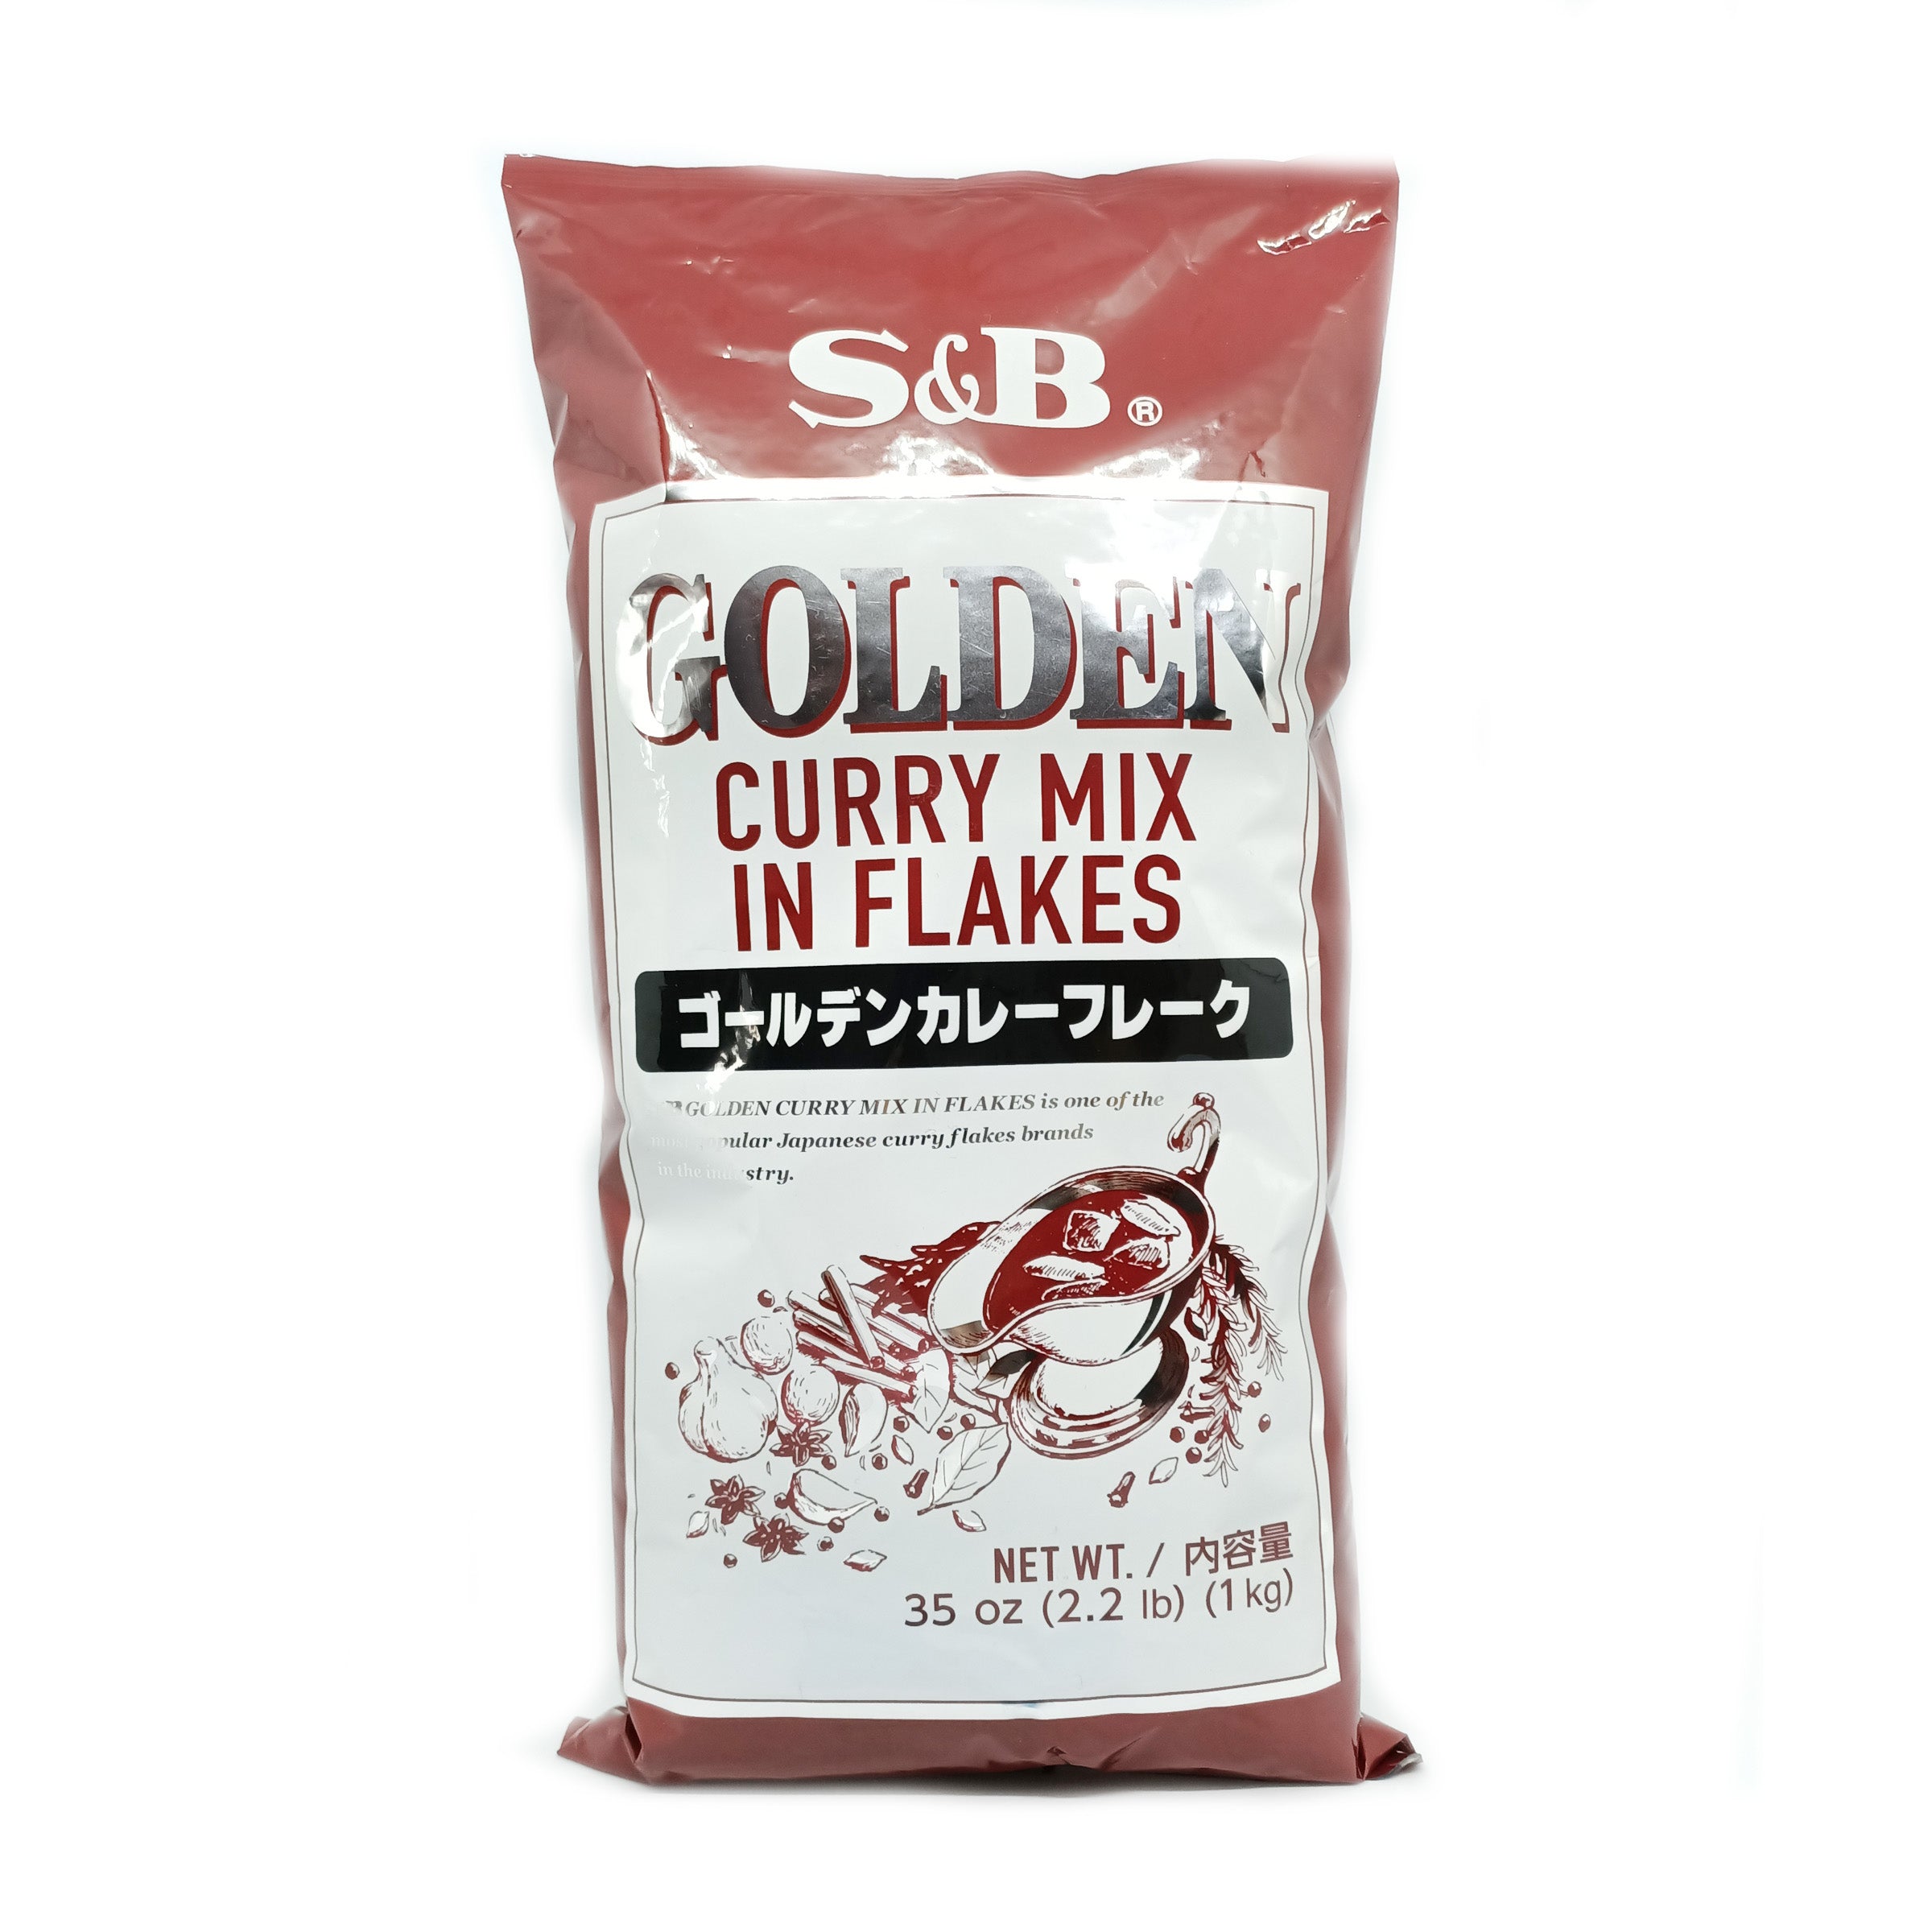 GOLDEN CURRY SAUCE MIX FLAKES 1KG ゴールデンカレーフレーク 1KG